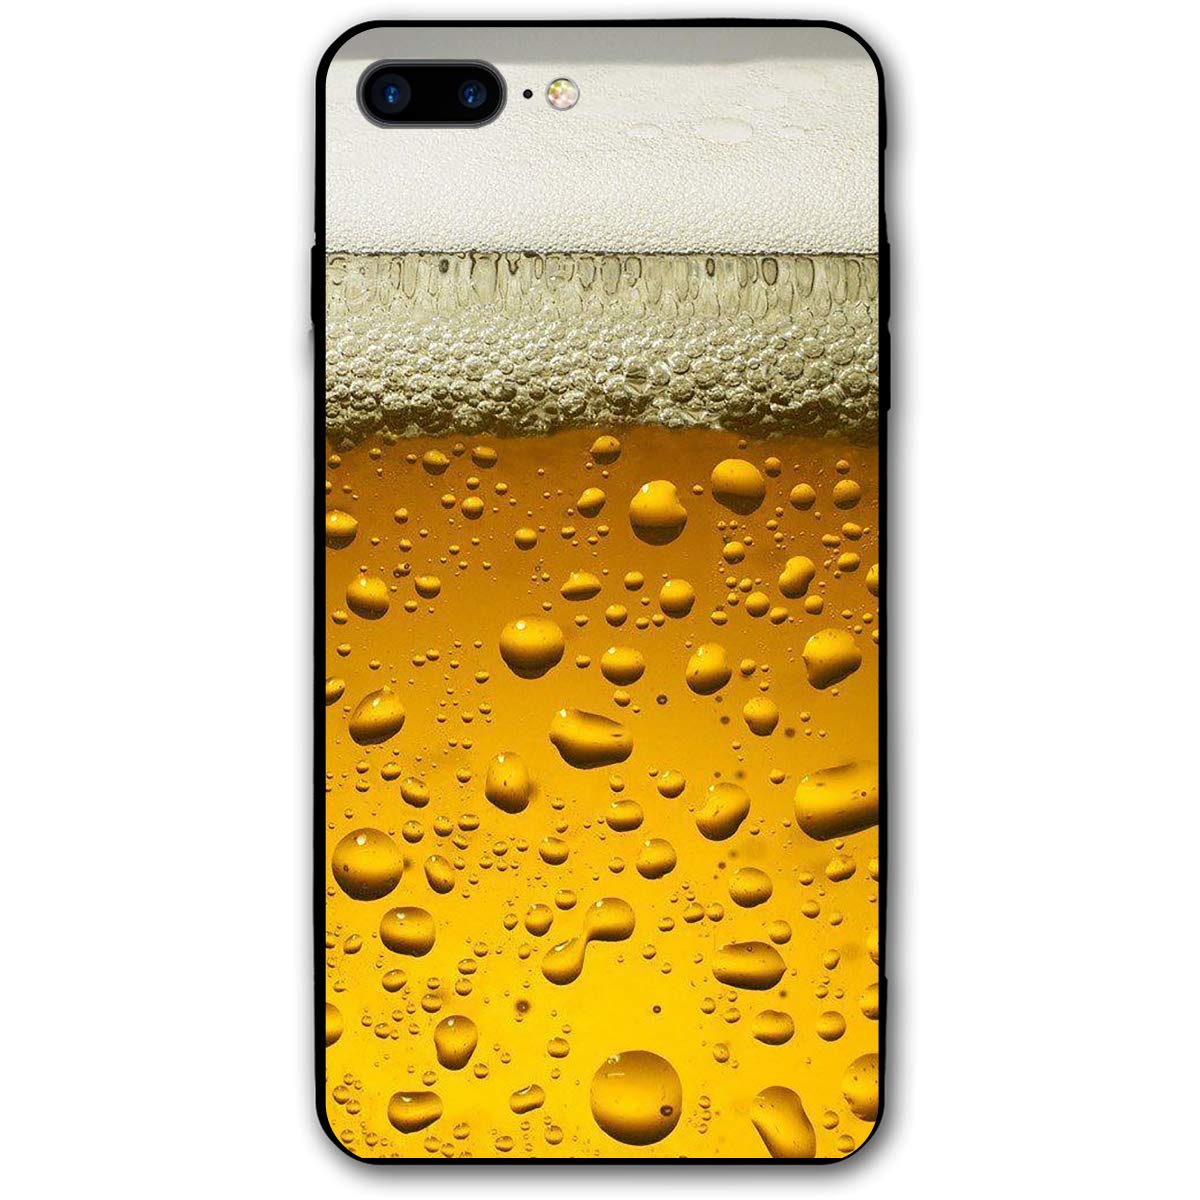 Iphone 7 Plus Case Iphone 8 Plus Case - High Resolution Beer , HD Wallpaper & Backgrounds